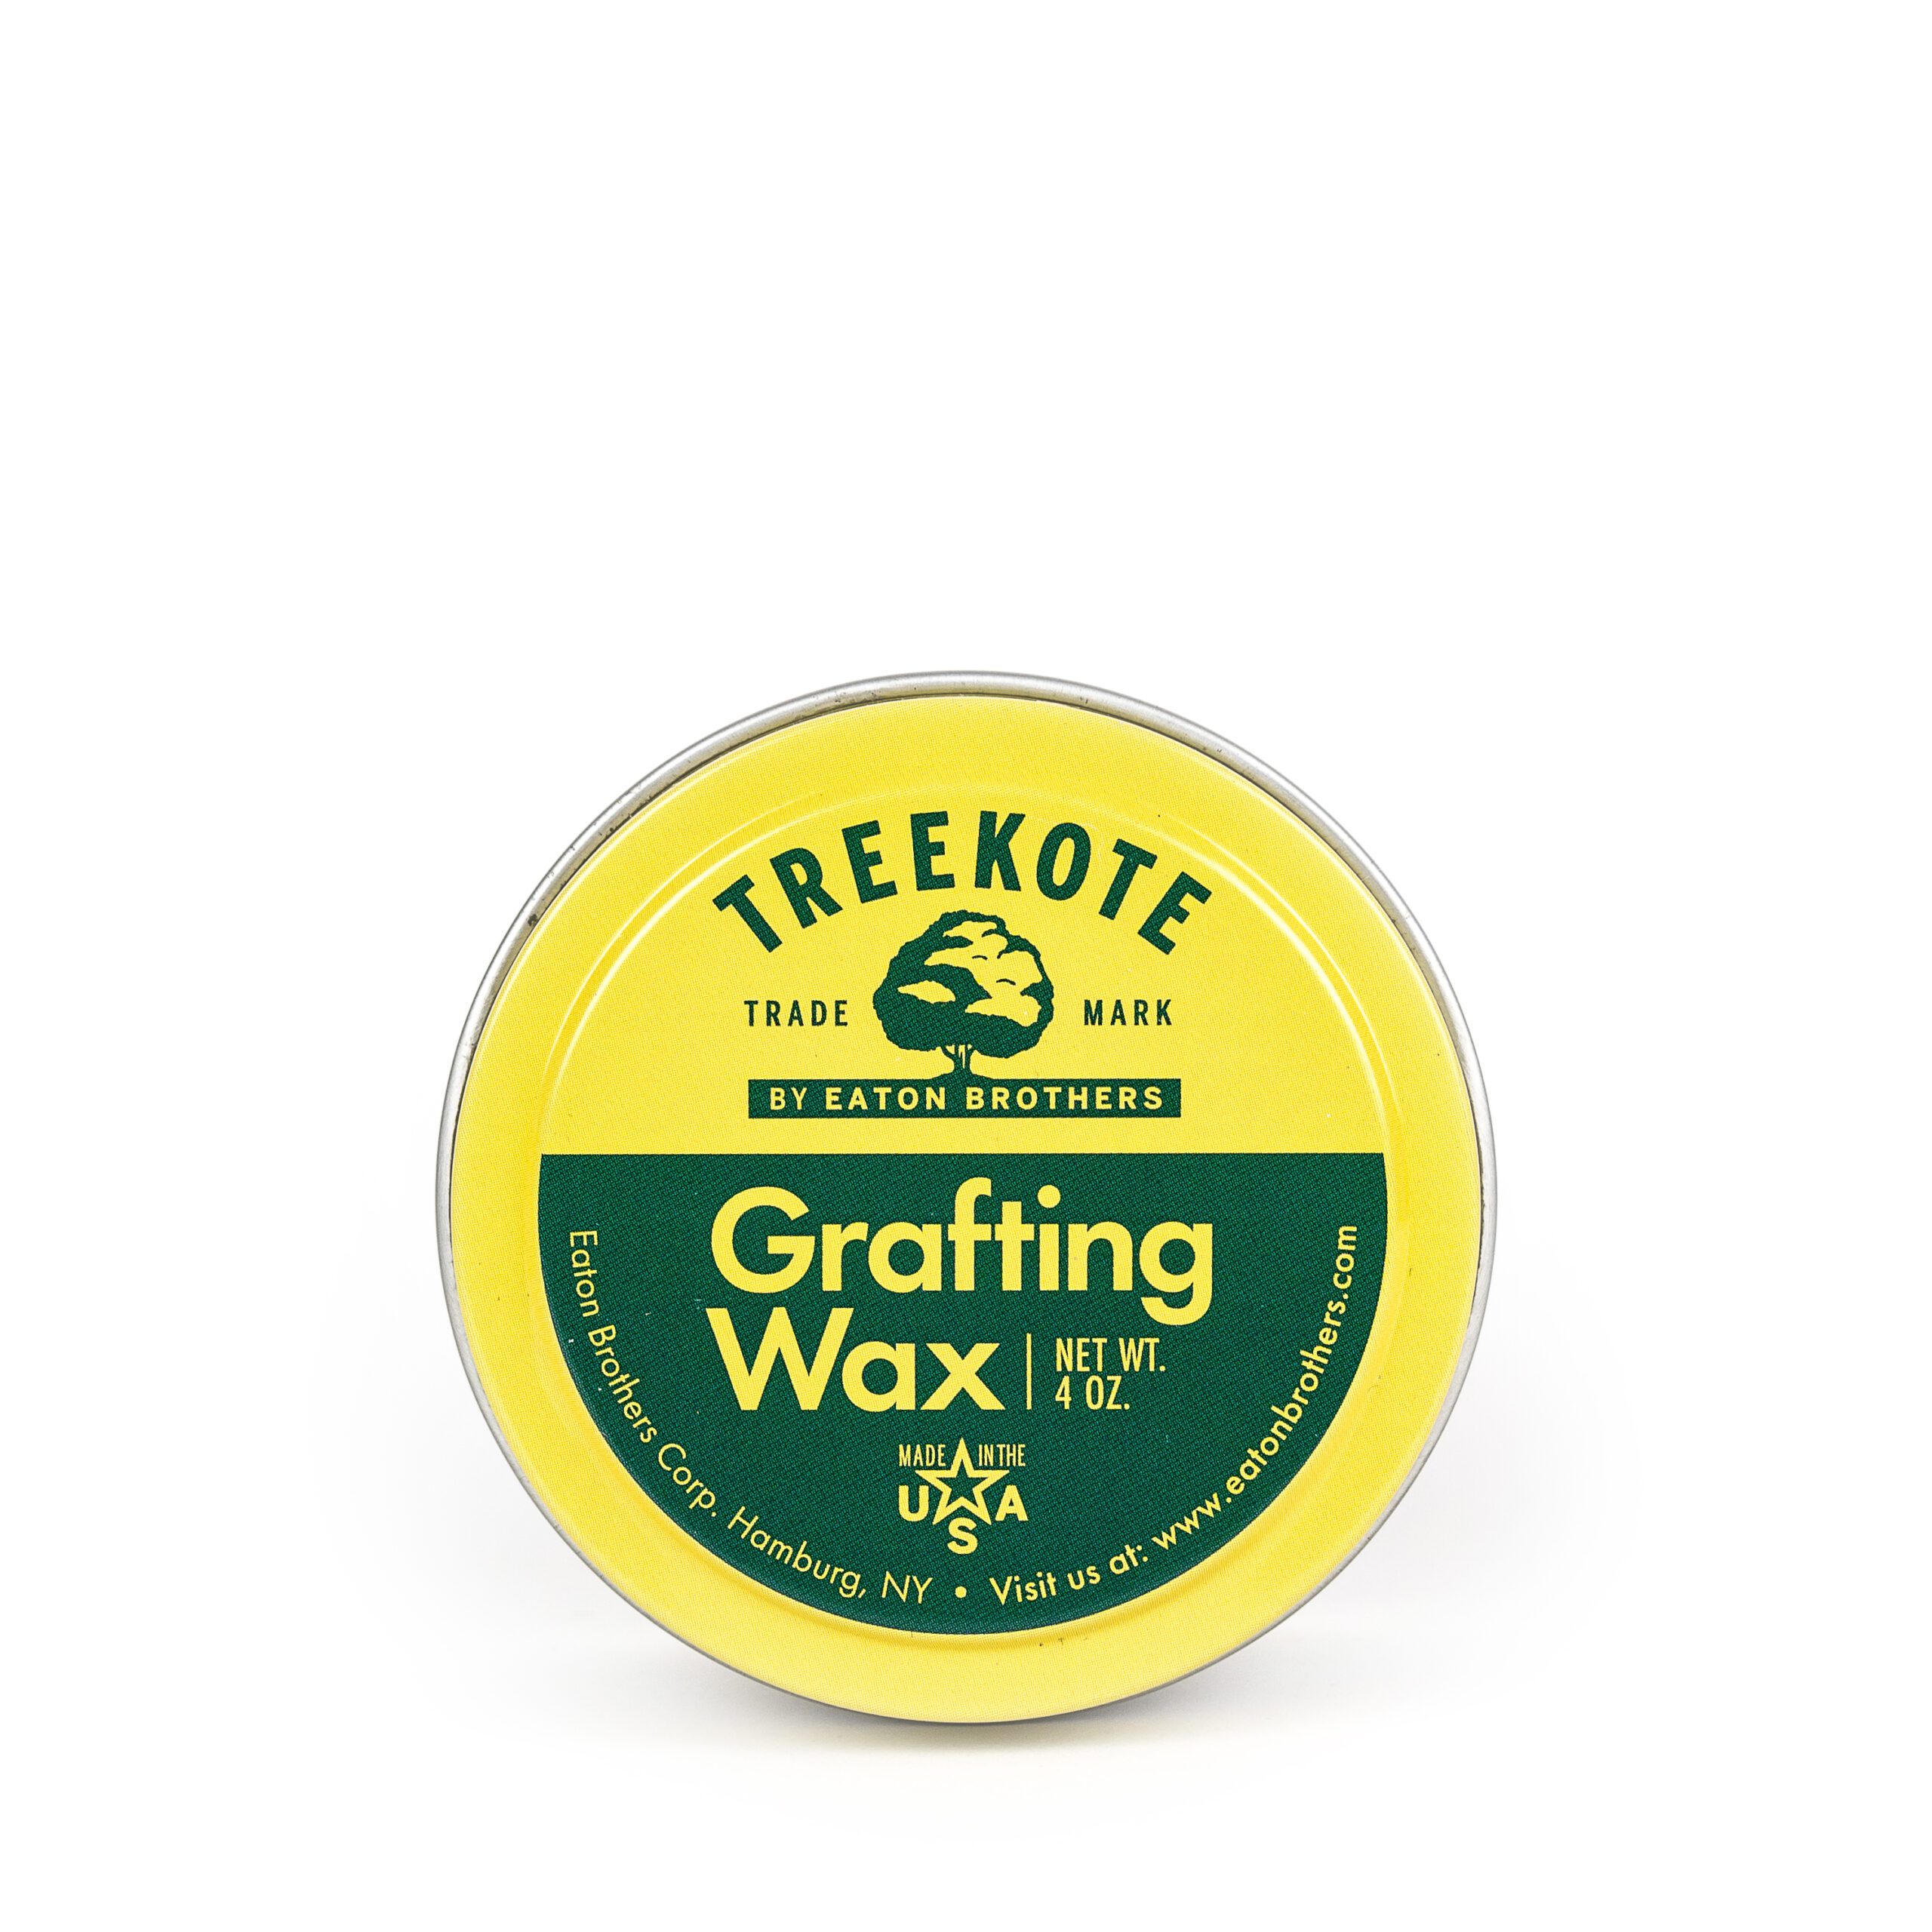 Grafting Wax - 1 lb - Essex County Co-Op